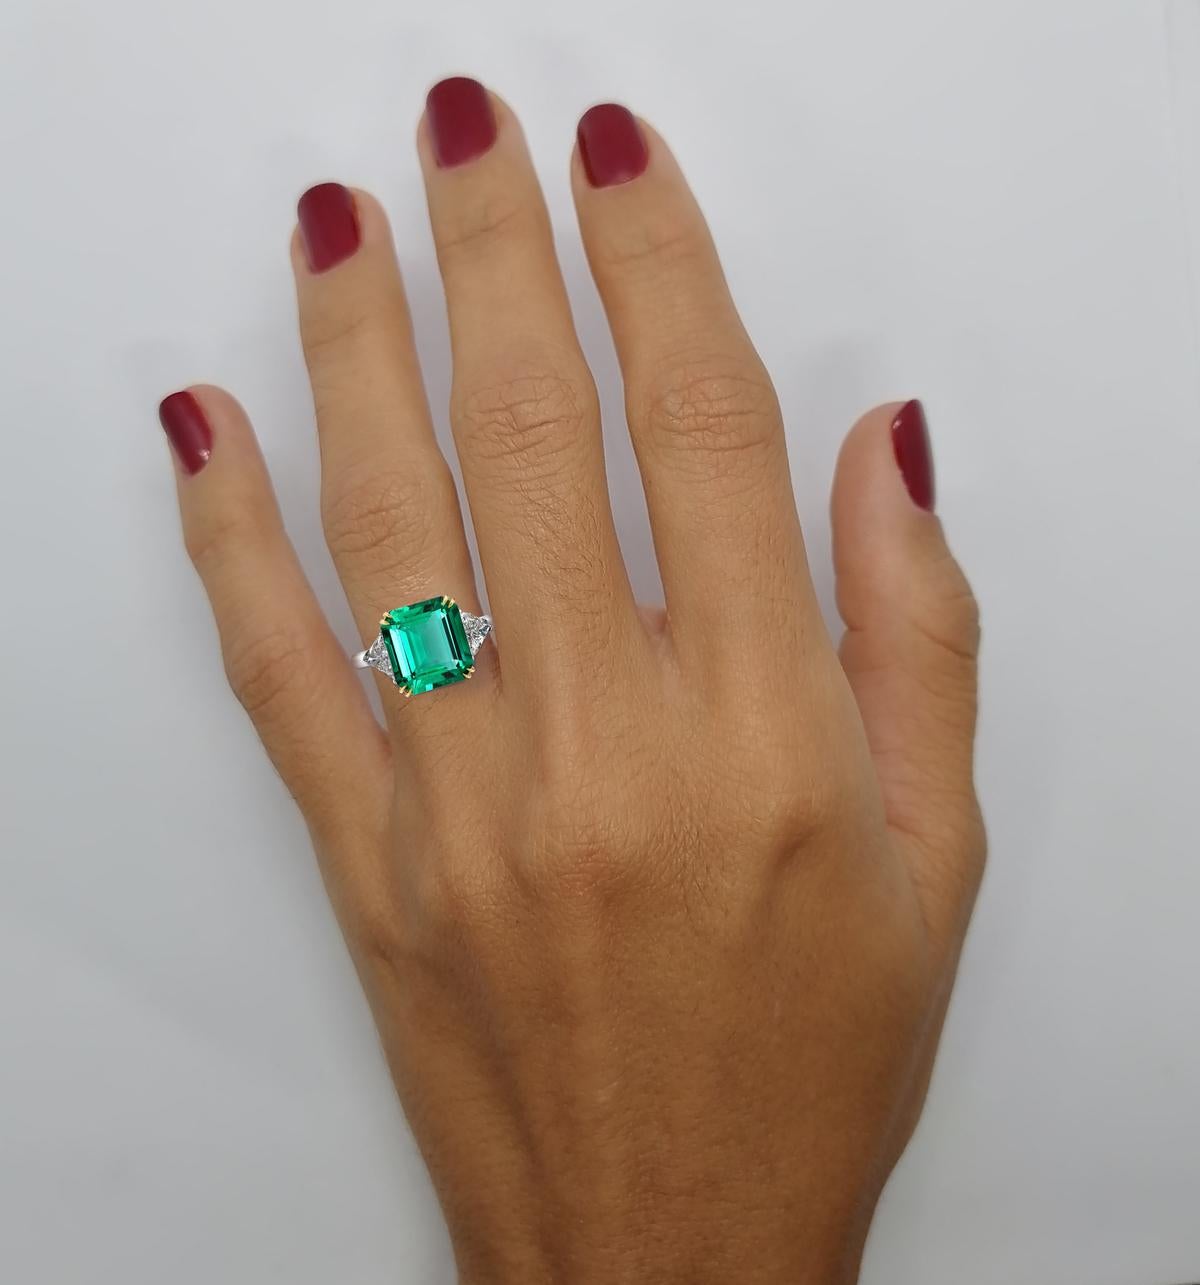 An exquisite emerald cut diamond ring with a beautiful handmade in Italy solid 18 carats white gold mounting that is composed by emerald cut diamonds at each side all very clear and full of brilliance.

The main stone is totally white faced consider